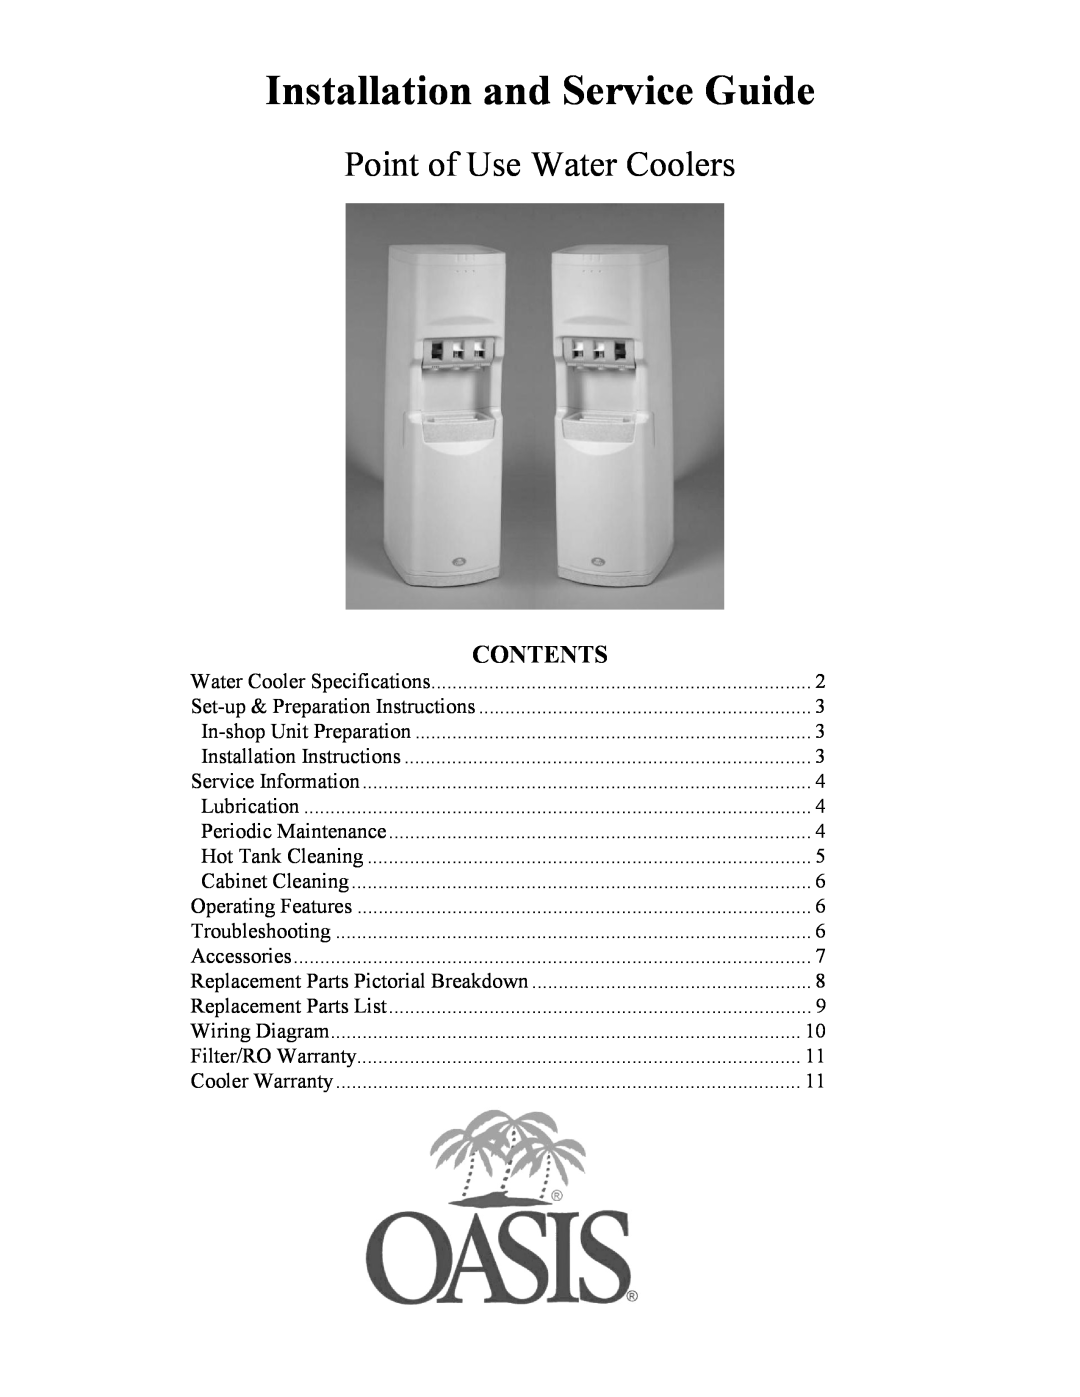 Oasis Concepts PHT1AQK specifications Contents, Installation and Service Guide, Point of Use Water Coolers 